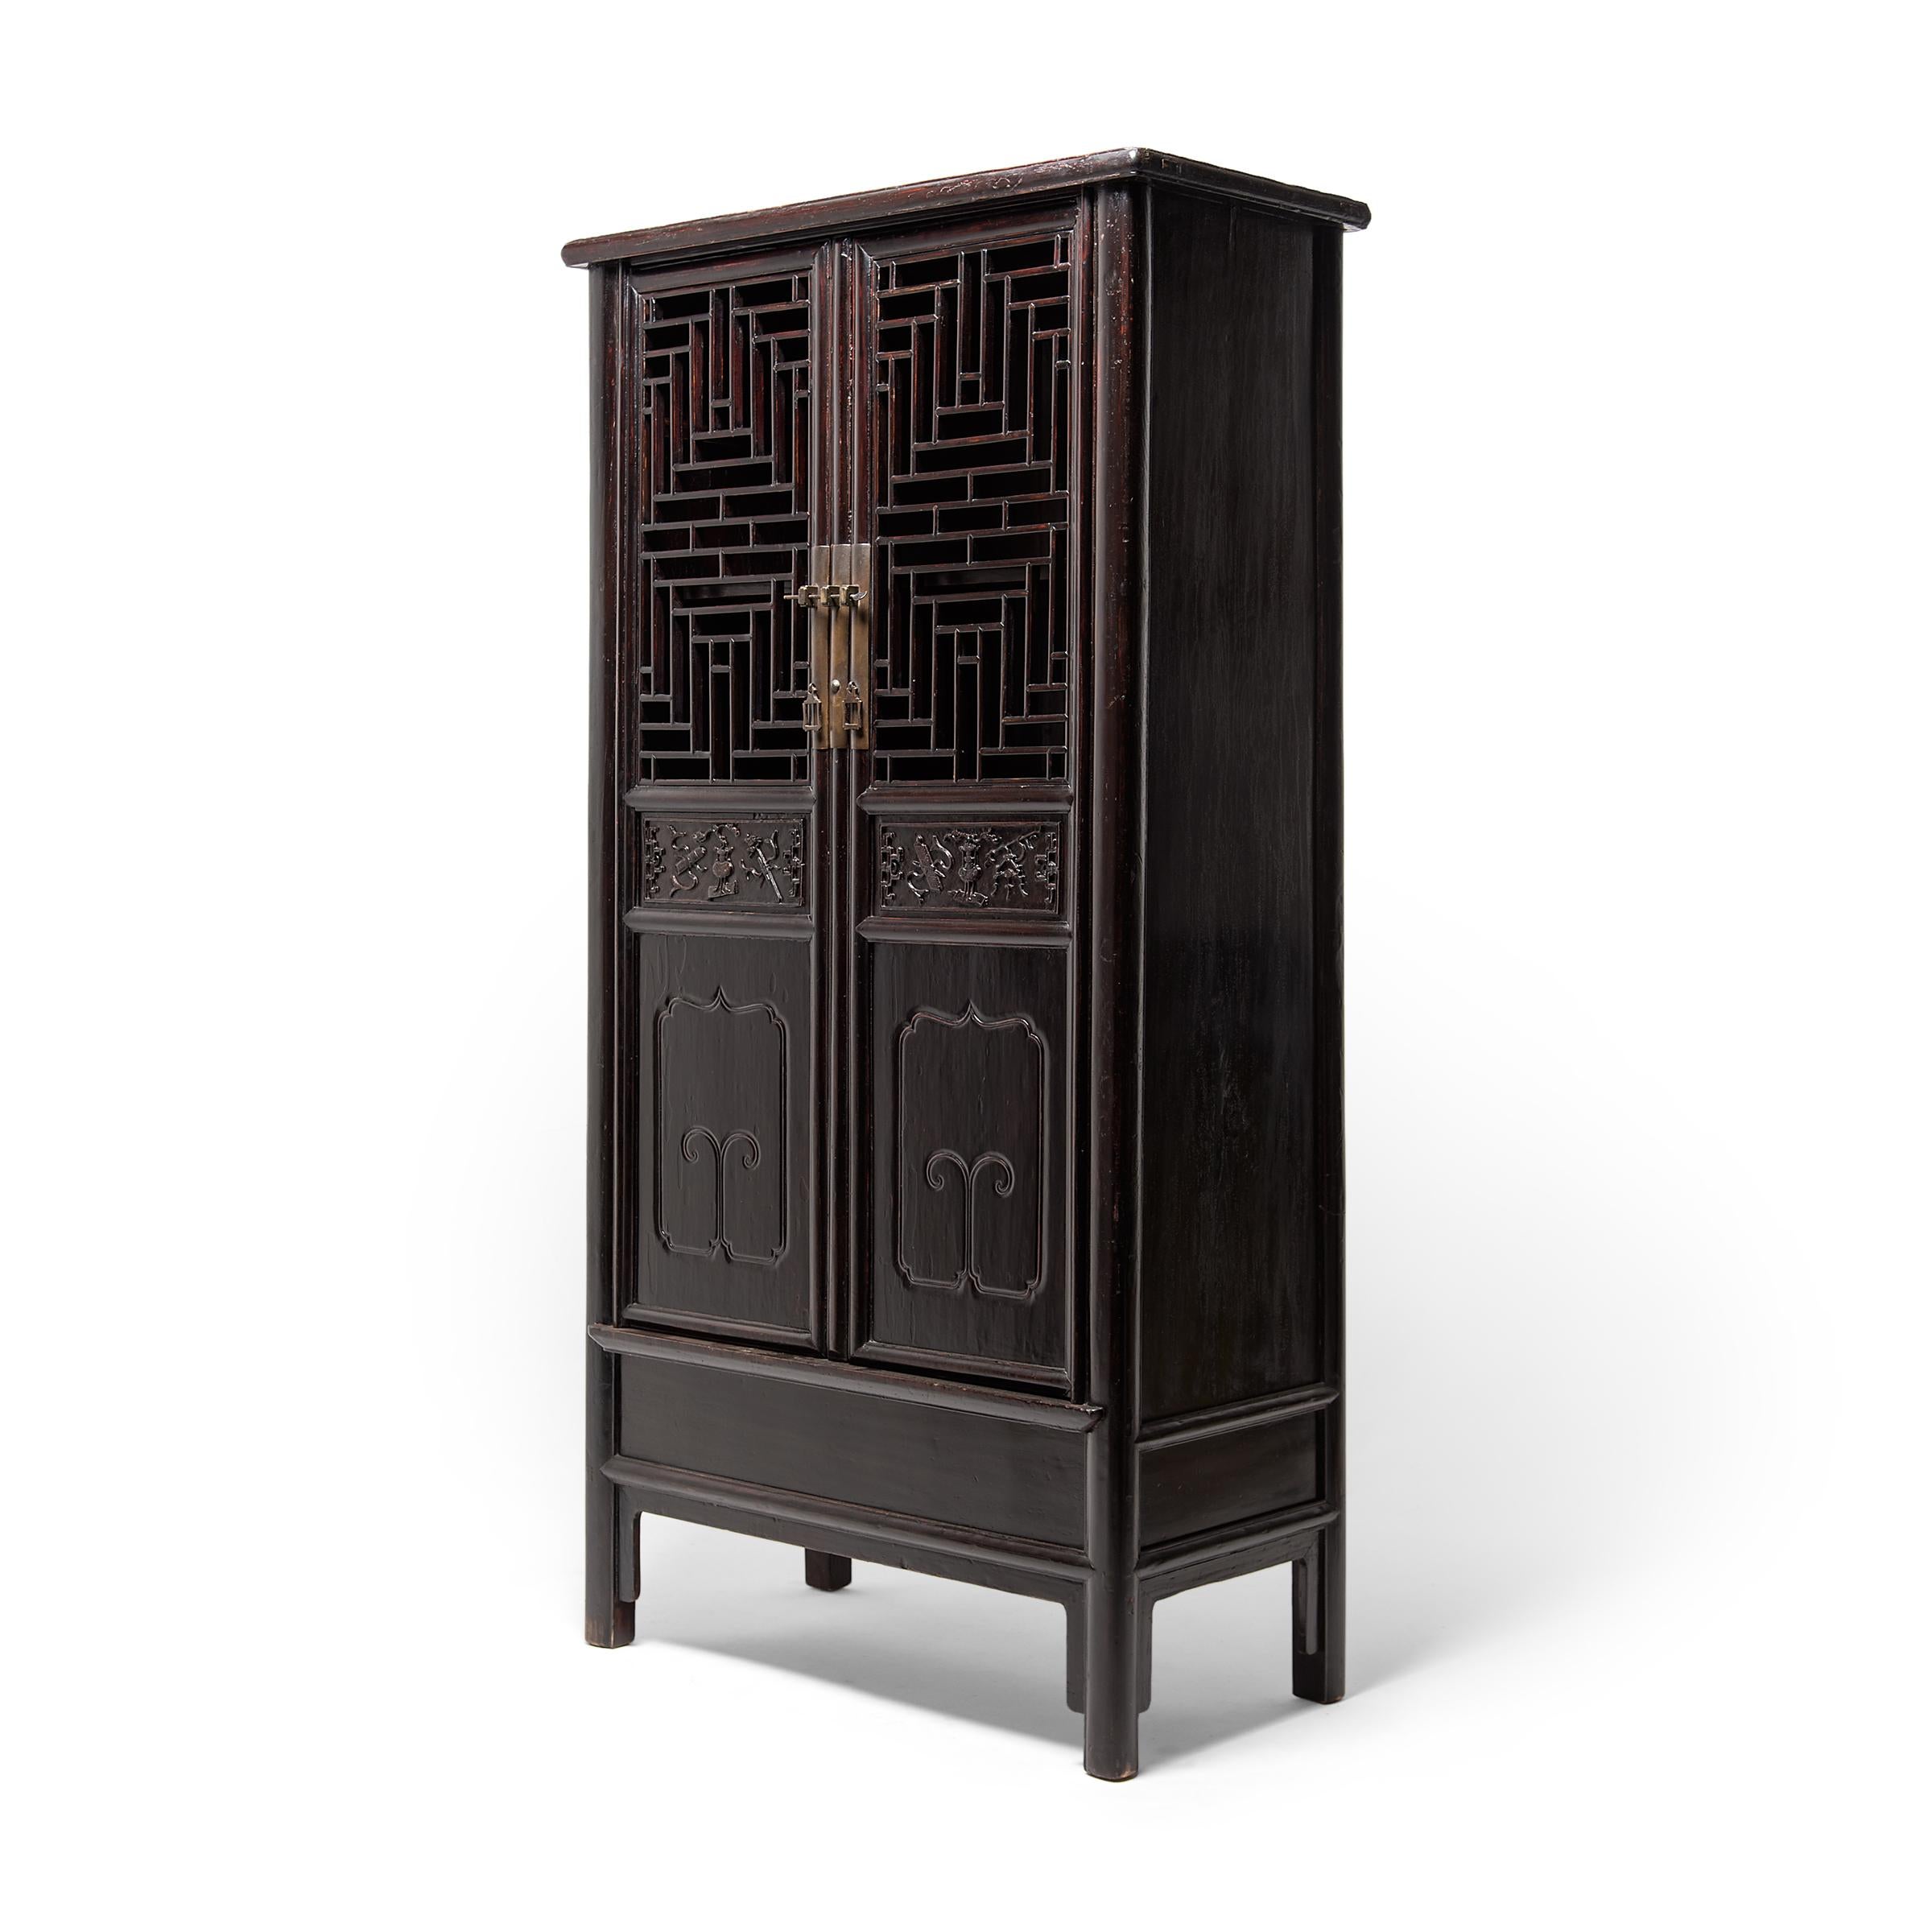 The focal point of this beautiful 19th century scholars' display cabinet is undoubtedly the complex diamond-form lattice panels fitted into the tall double doors. Unlike fretwork made by carving or perforating a solid panel, this lattice would have